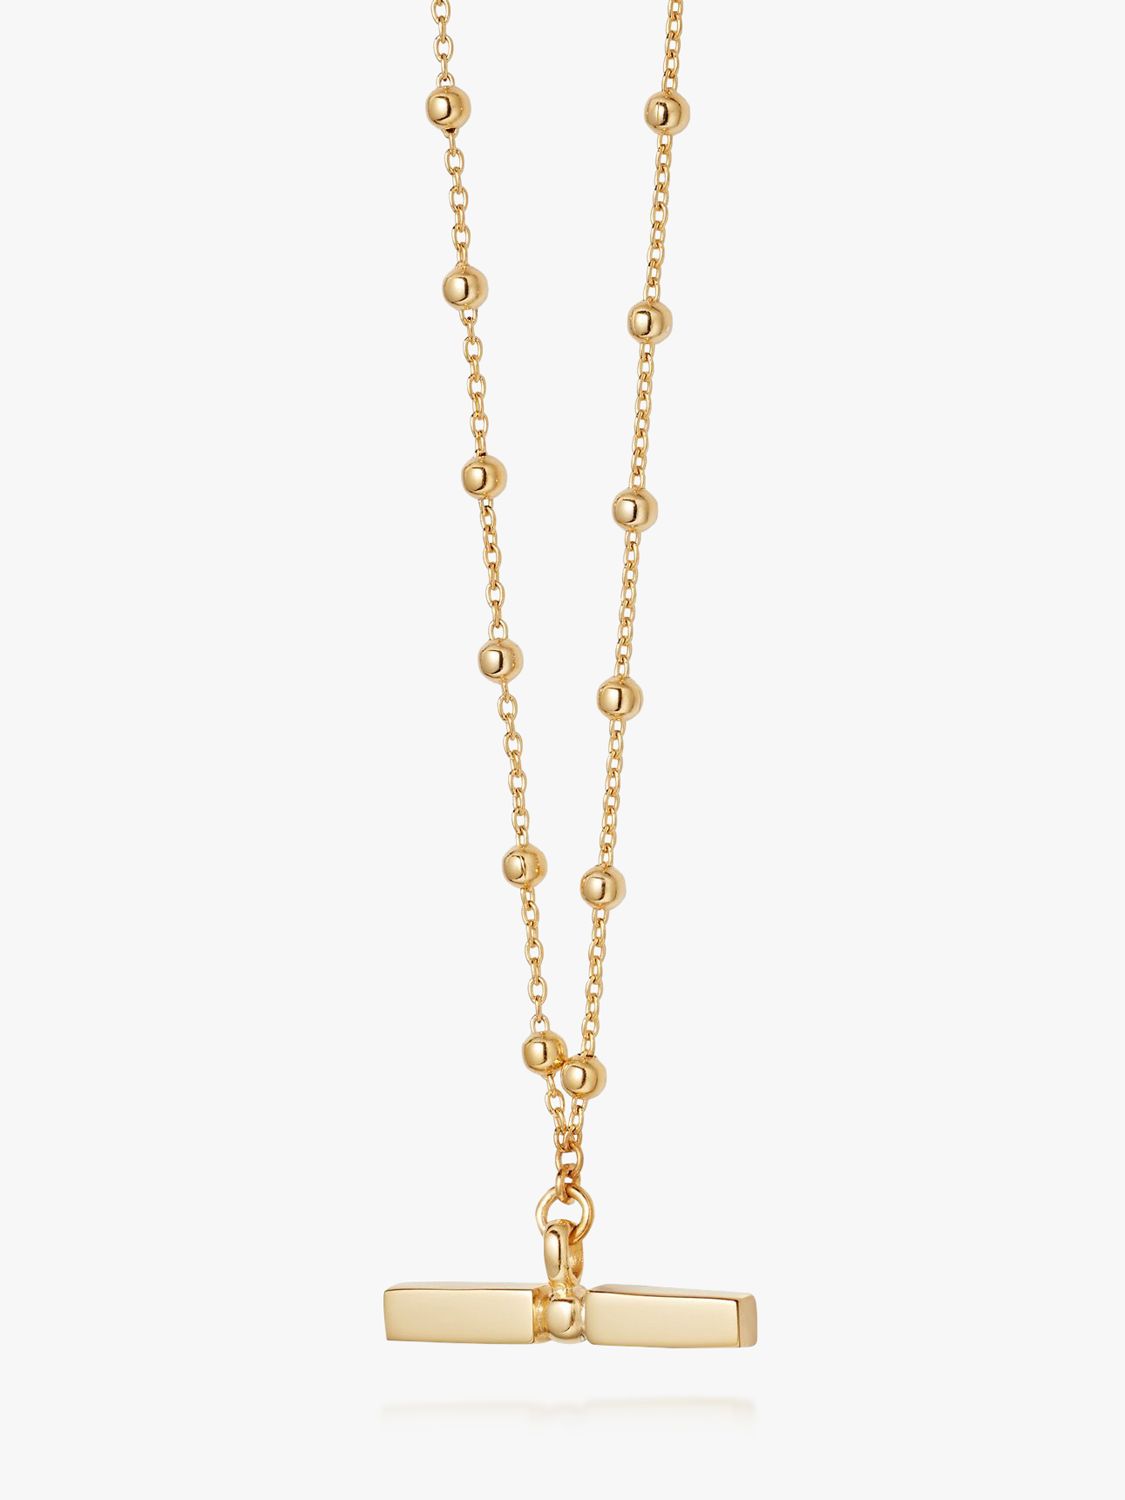 Daisy London Bead and T Bar Necklace, Gold at John Lewis